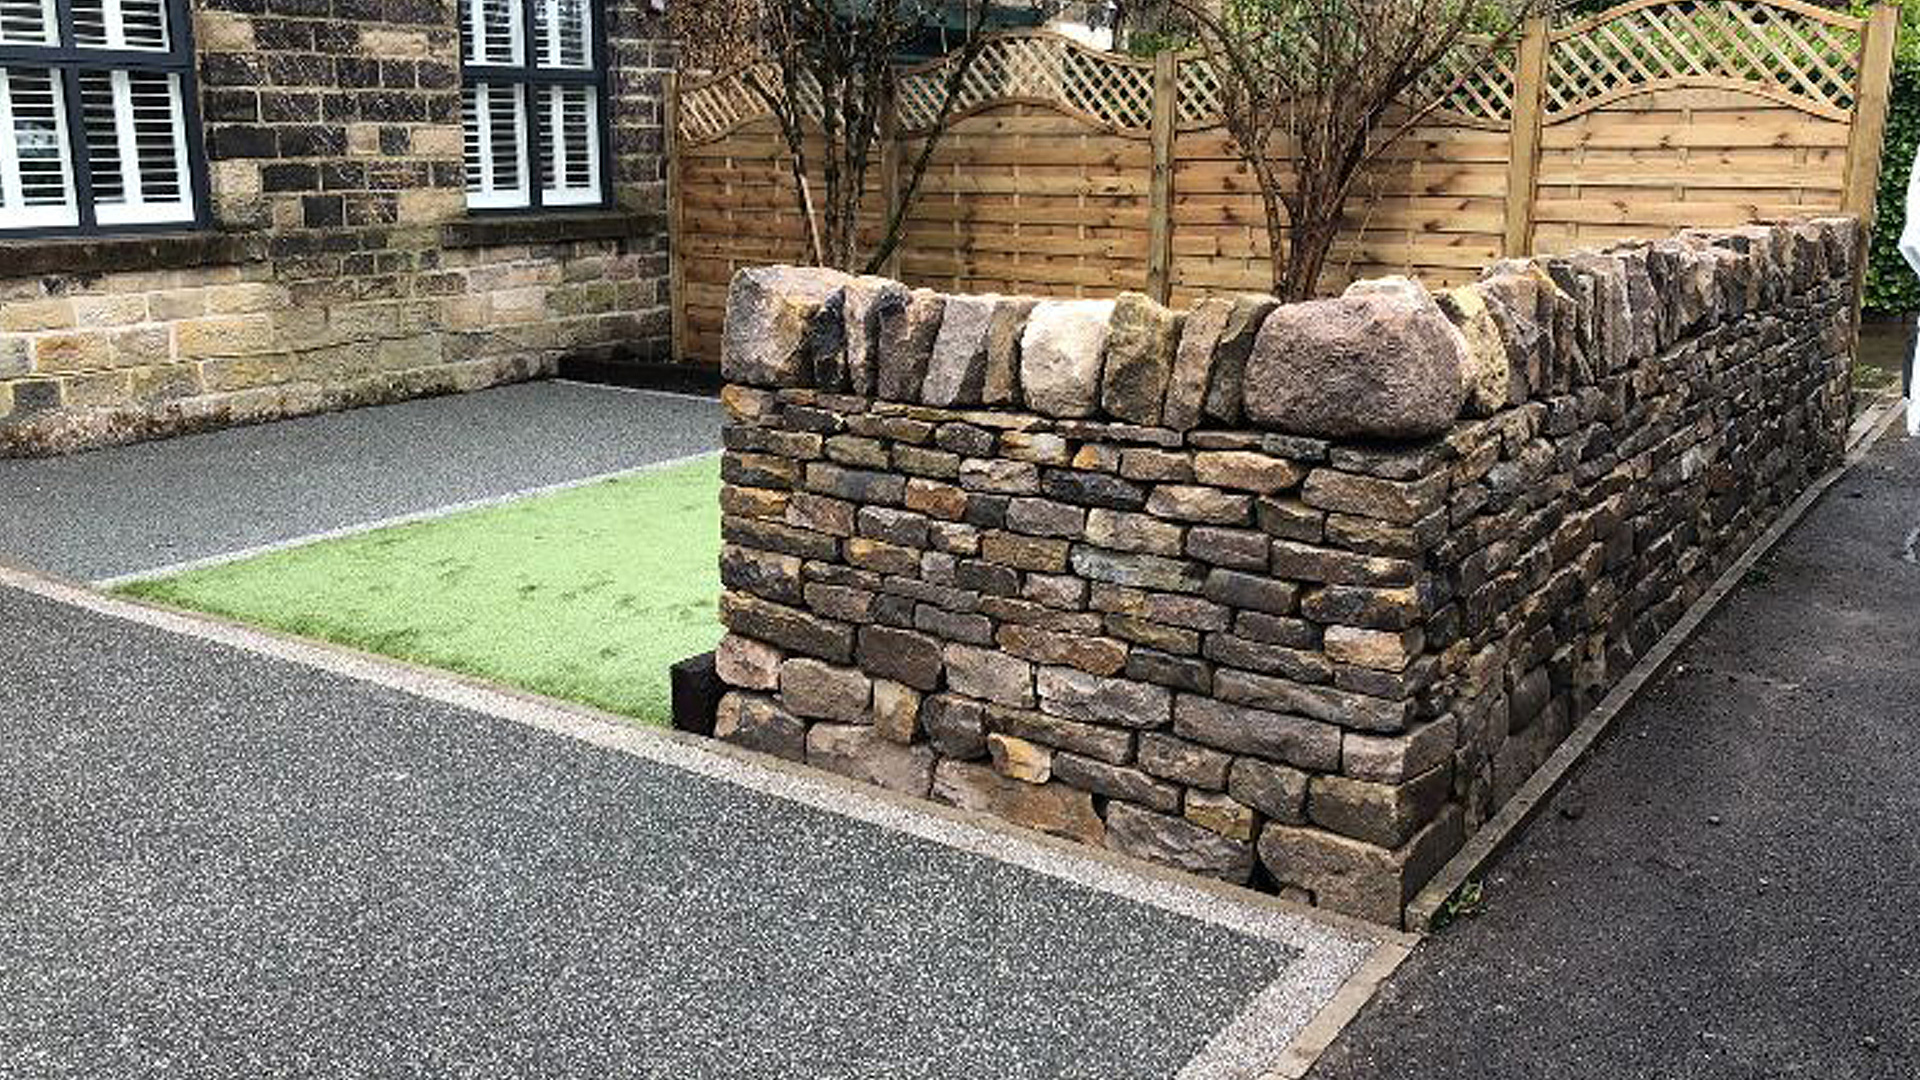 Supreme Resin Driveways -  Unlike resin bonded aggregates or loose gravel, a resin bound surface is smooth, flat and seamless. This is because of the way that resin and aggregates are mixed and then trowelled. As a surface, it is ideally suited for both pedestrian and vehicular traffic/parking.